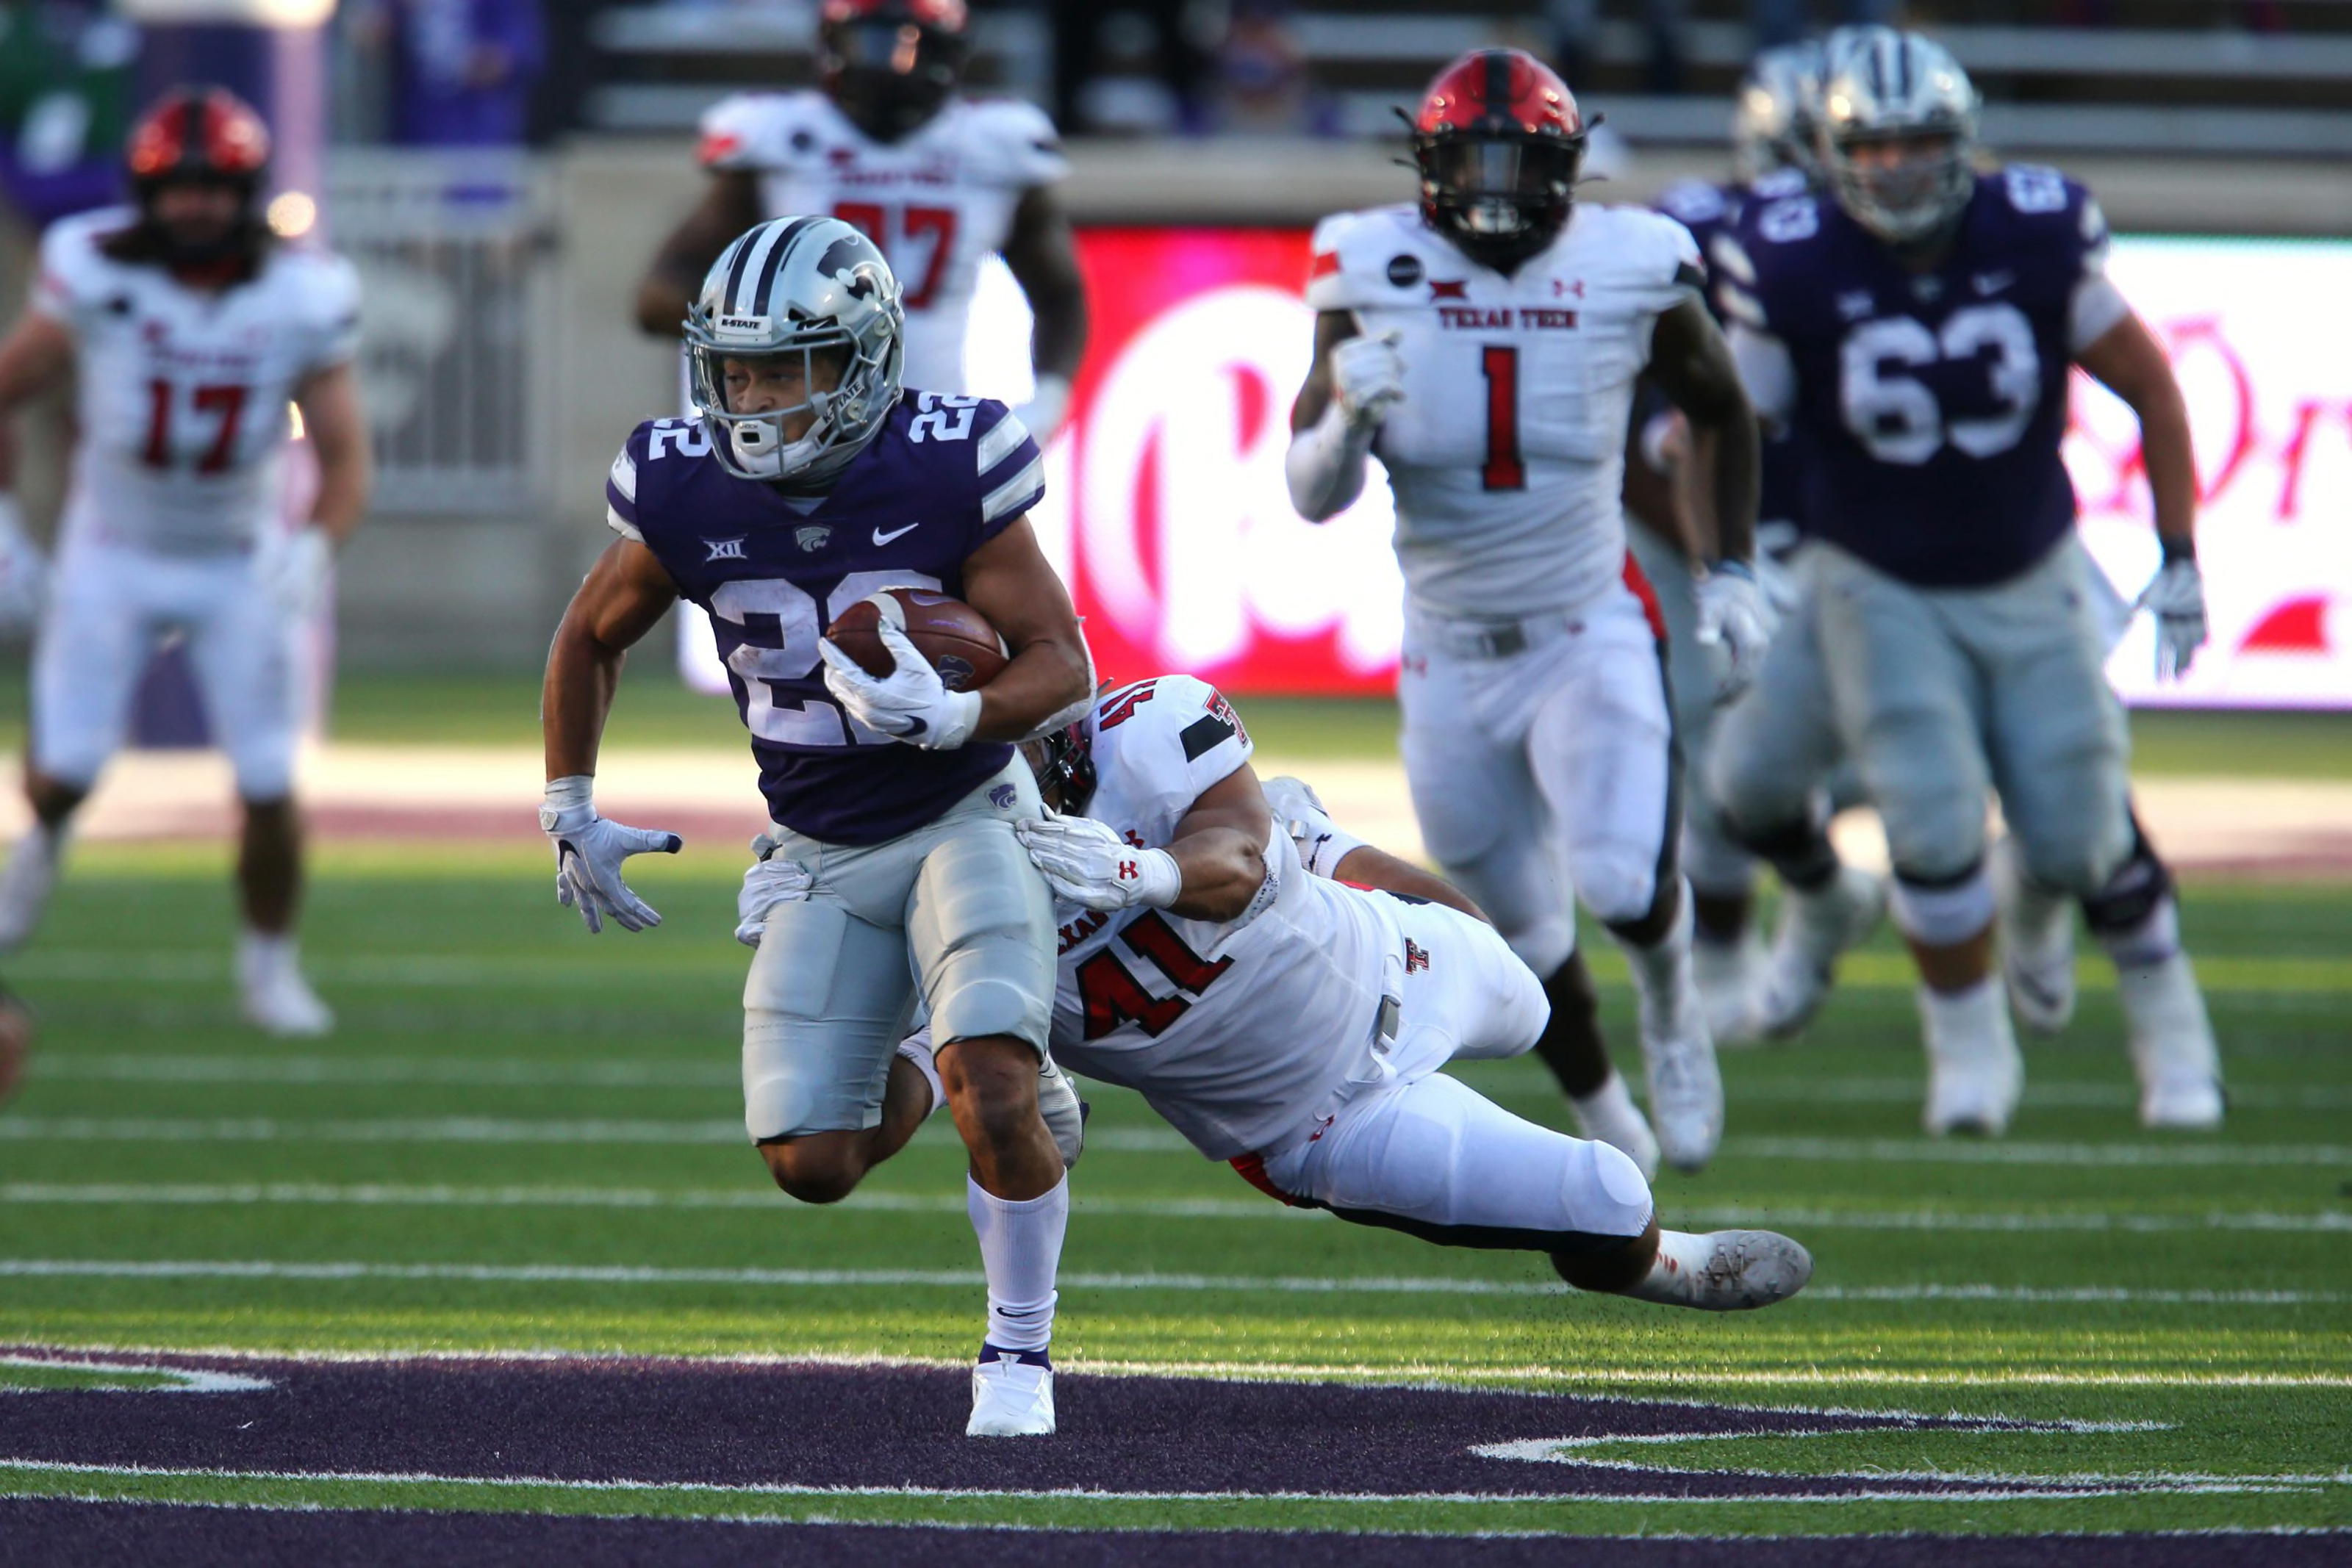 Kansas State Football 3 takeaways from clutch win over Texas Tech Page 2